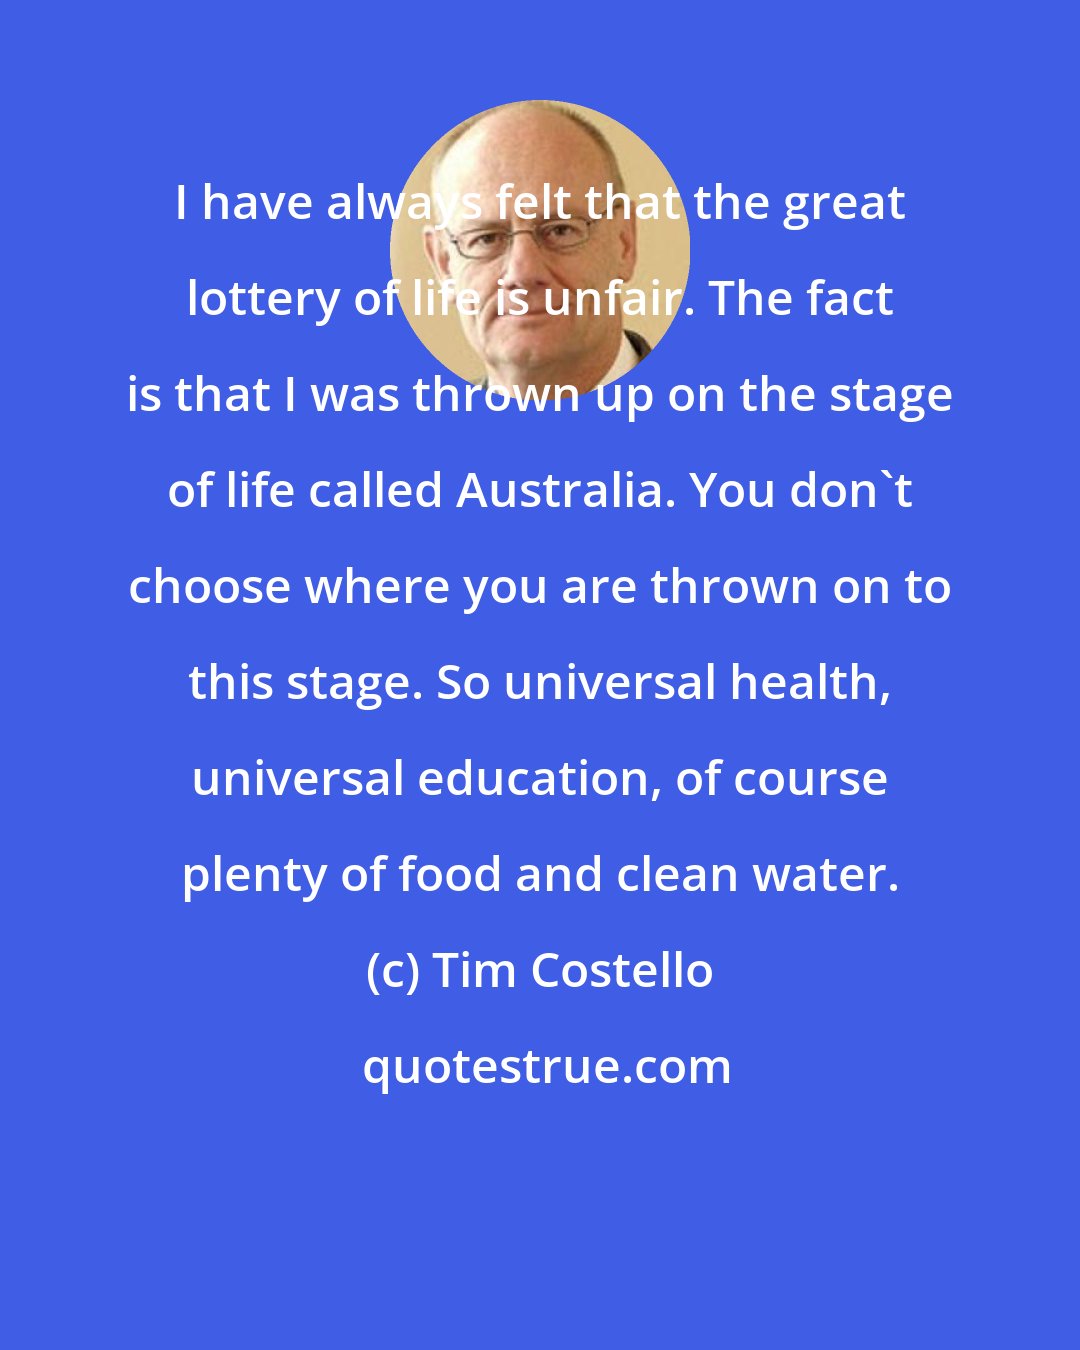 Tim Costello: I have always felt that the great lottery of life is unfair. The fact is that I was thrown up on the stage of life called Australia. You don't choose where you are thrown on to this stage. So universal health, universal education, of course plenty of food and clean water.